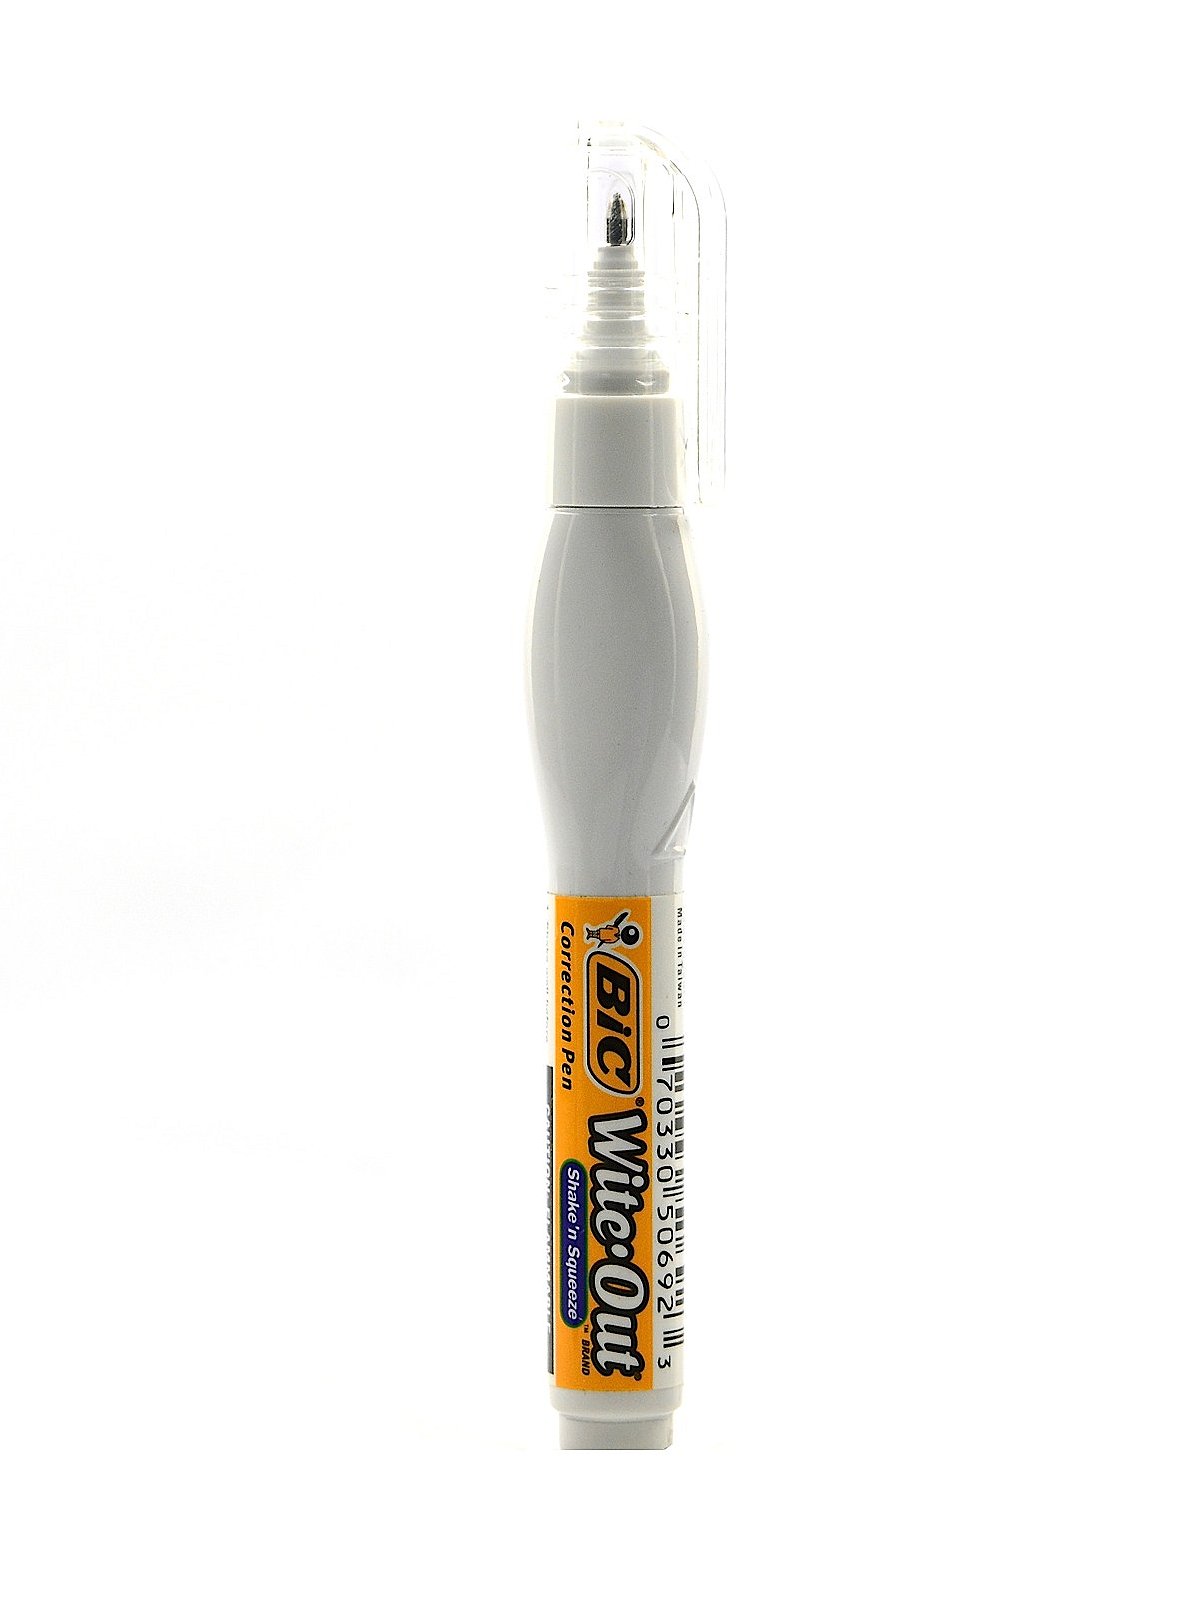 Bic Wite Out Correction Pen, Shake 'N Squeeze - 1 pack, 0.3 fl oz pen